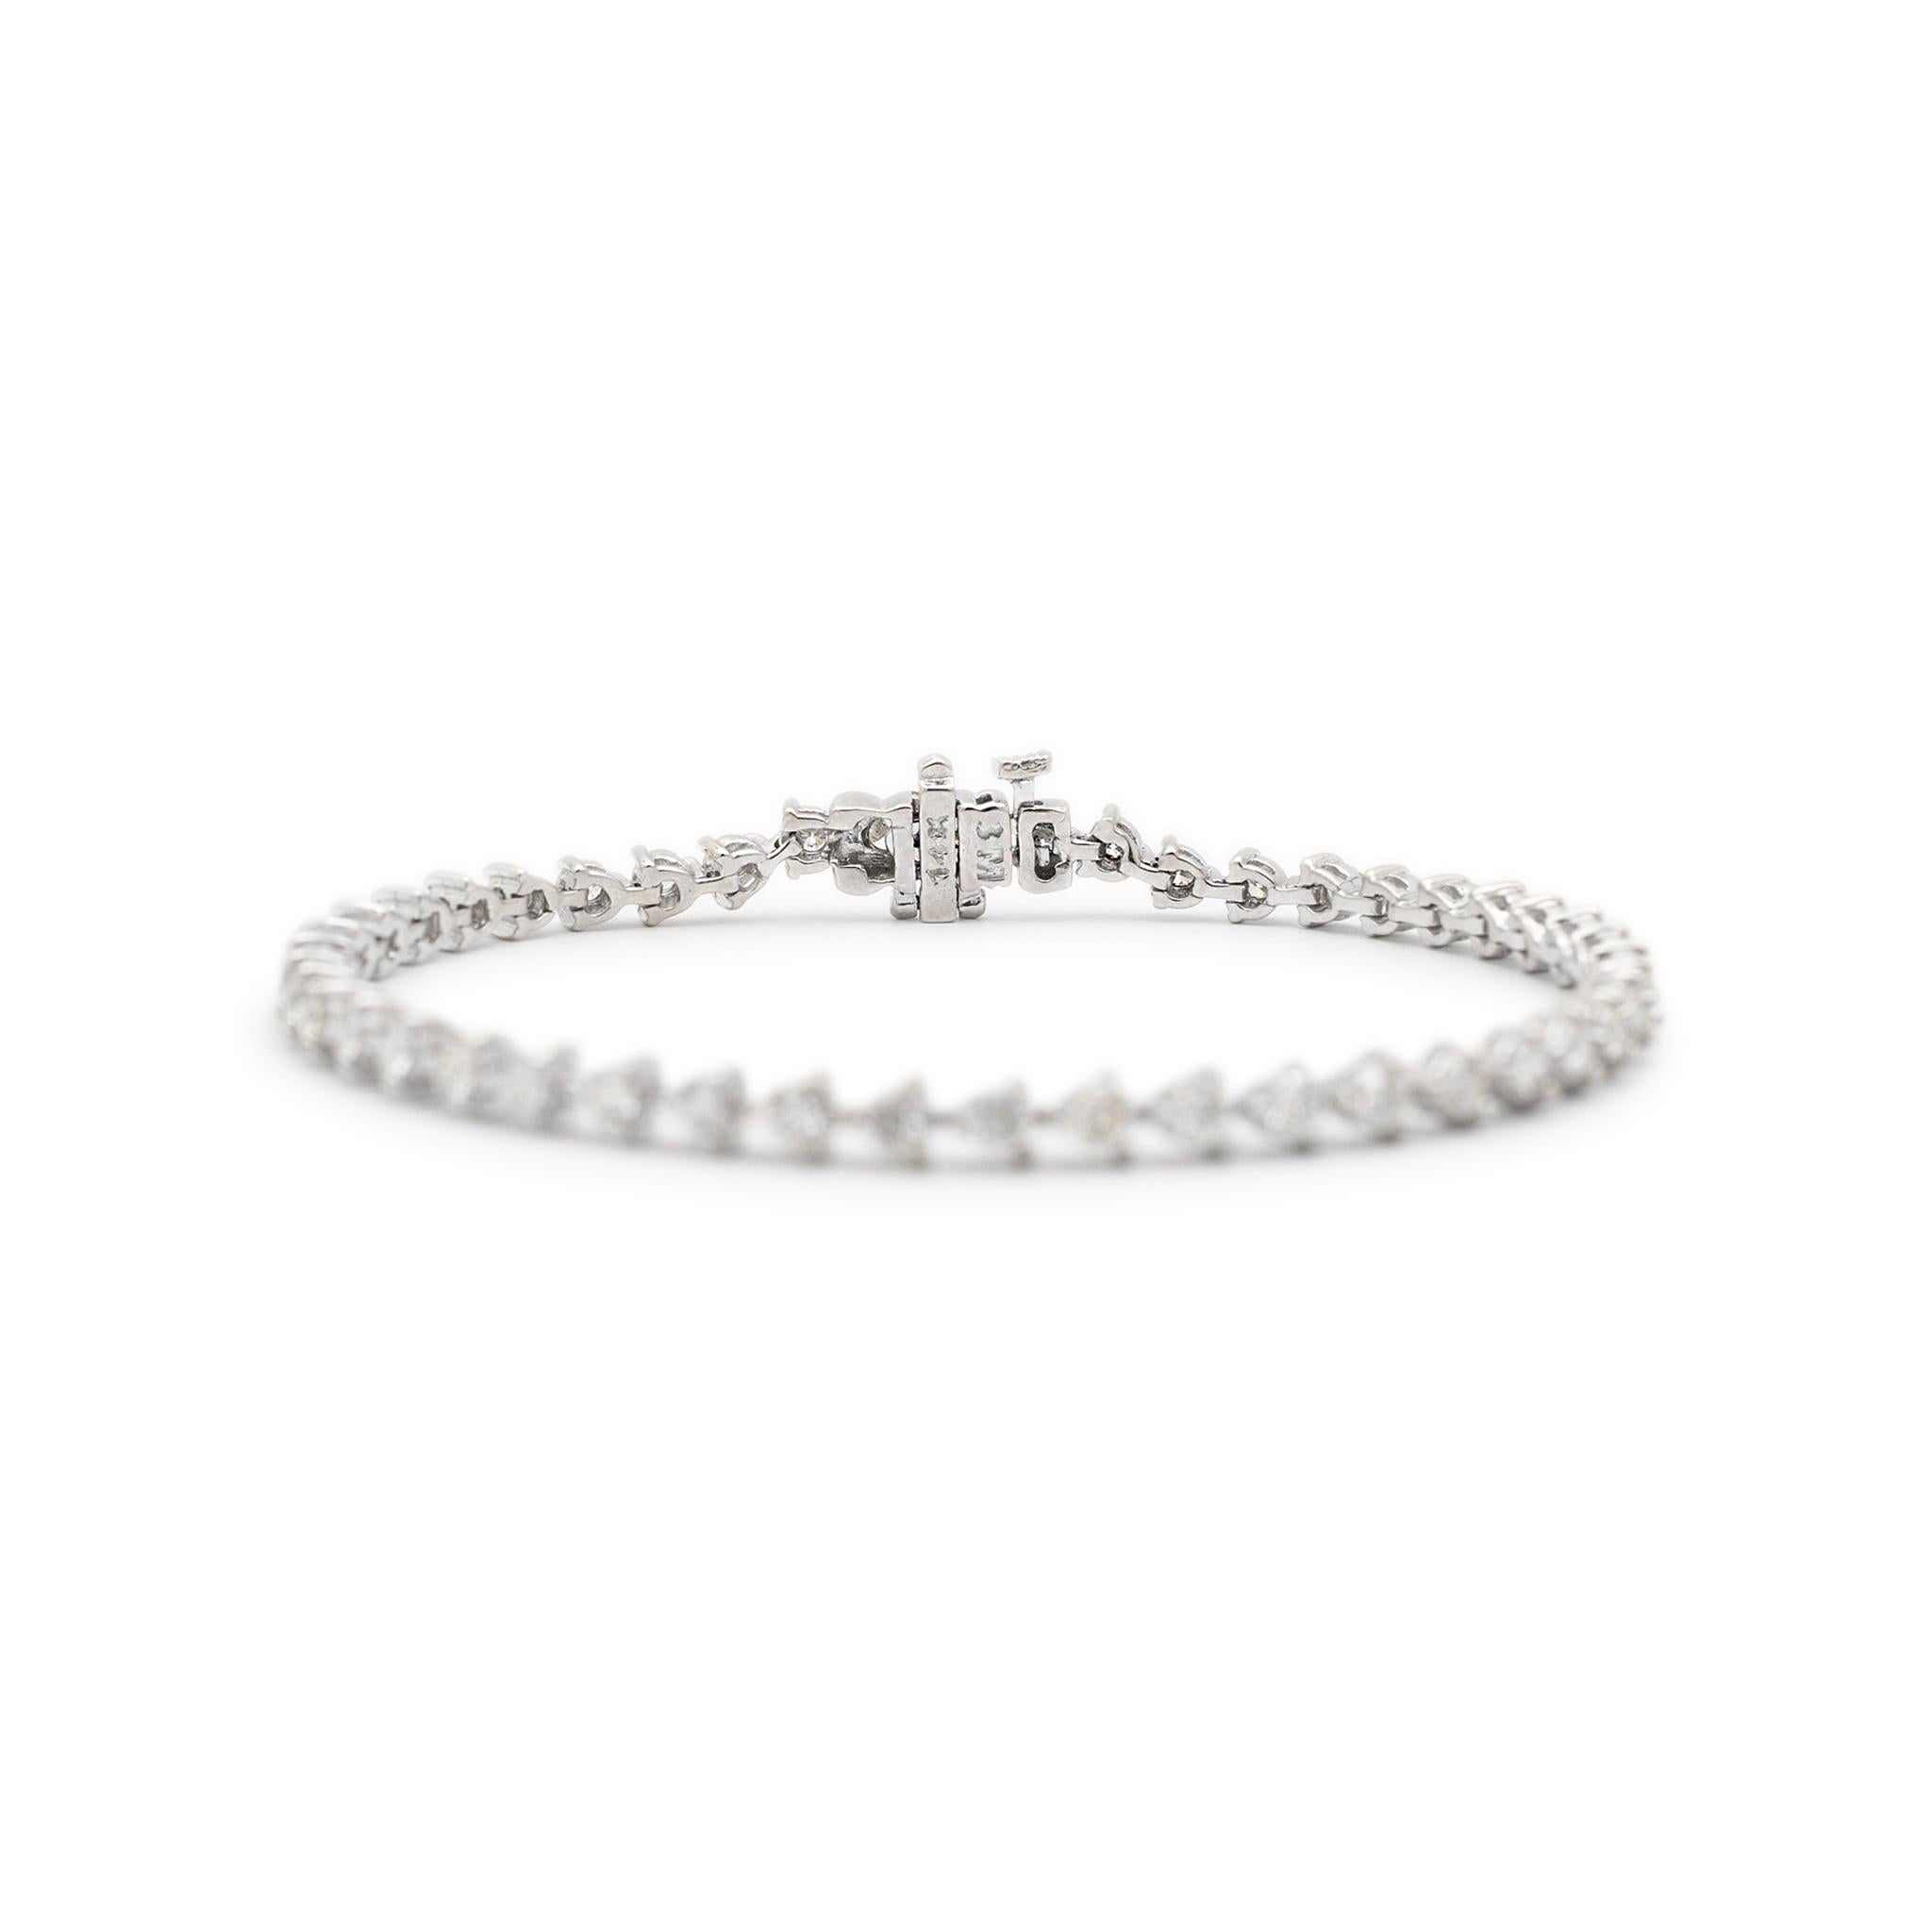 Metal Type: 14K White Gold

Length: 7.00 inches

Width: 4.00 mm

Weight: 10.40 grams

14K white gold, diamond tennis bracelet. The metal was tested and determined to be 14K white gold, Engraved with 